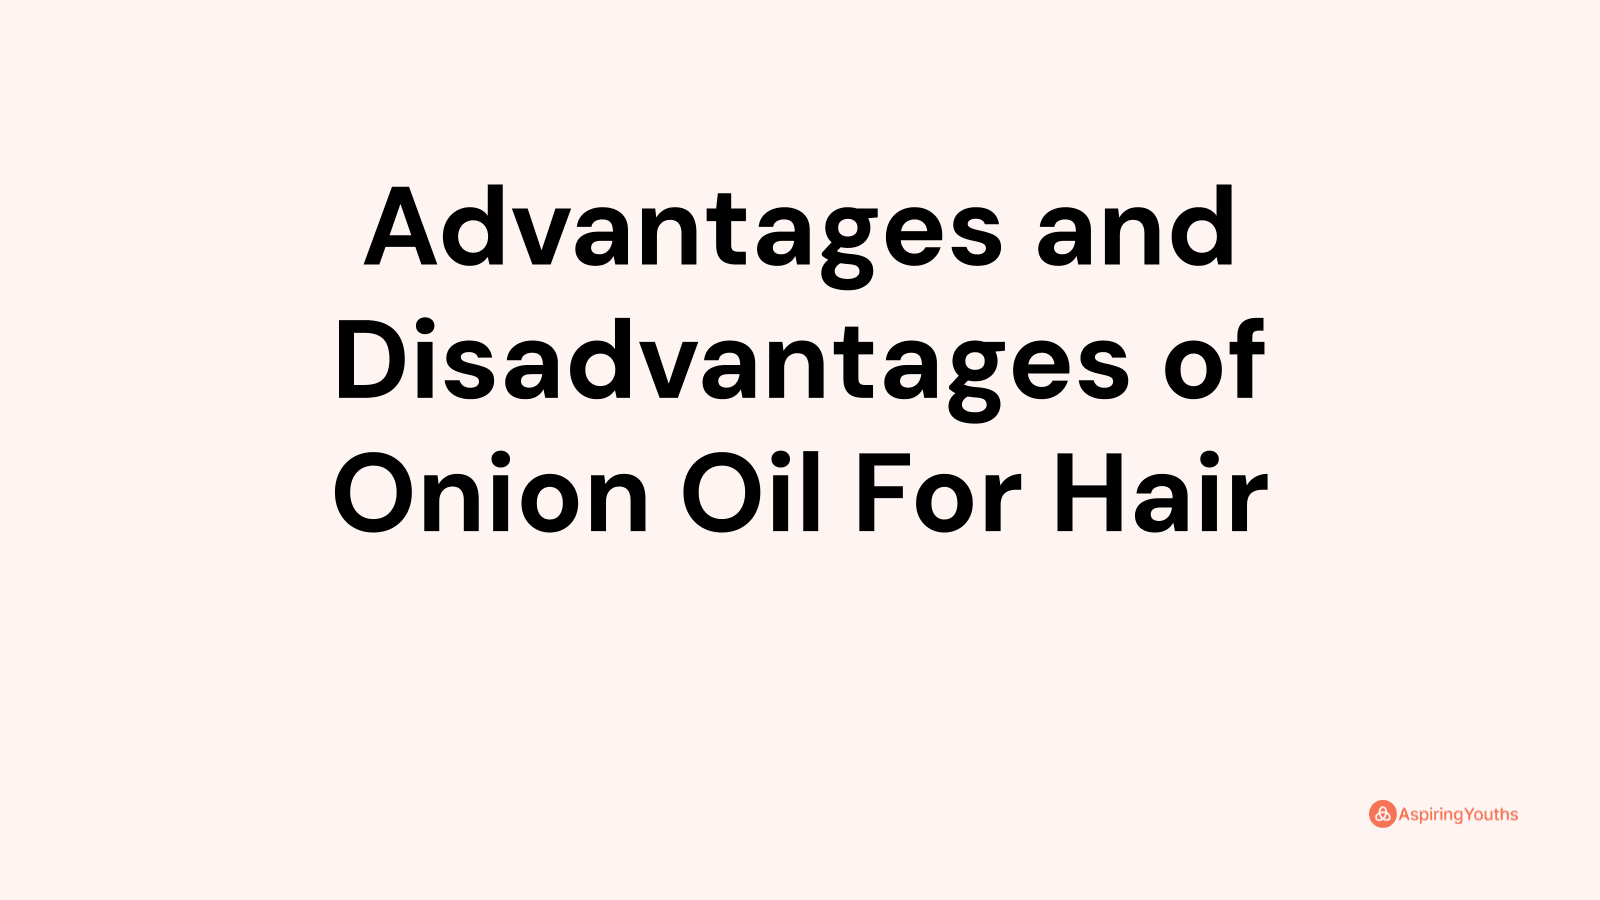 Advantages and disadvantages of Onion Oil For Hair